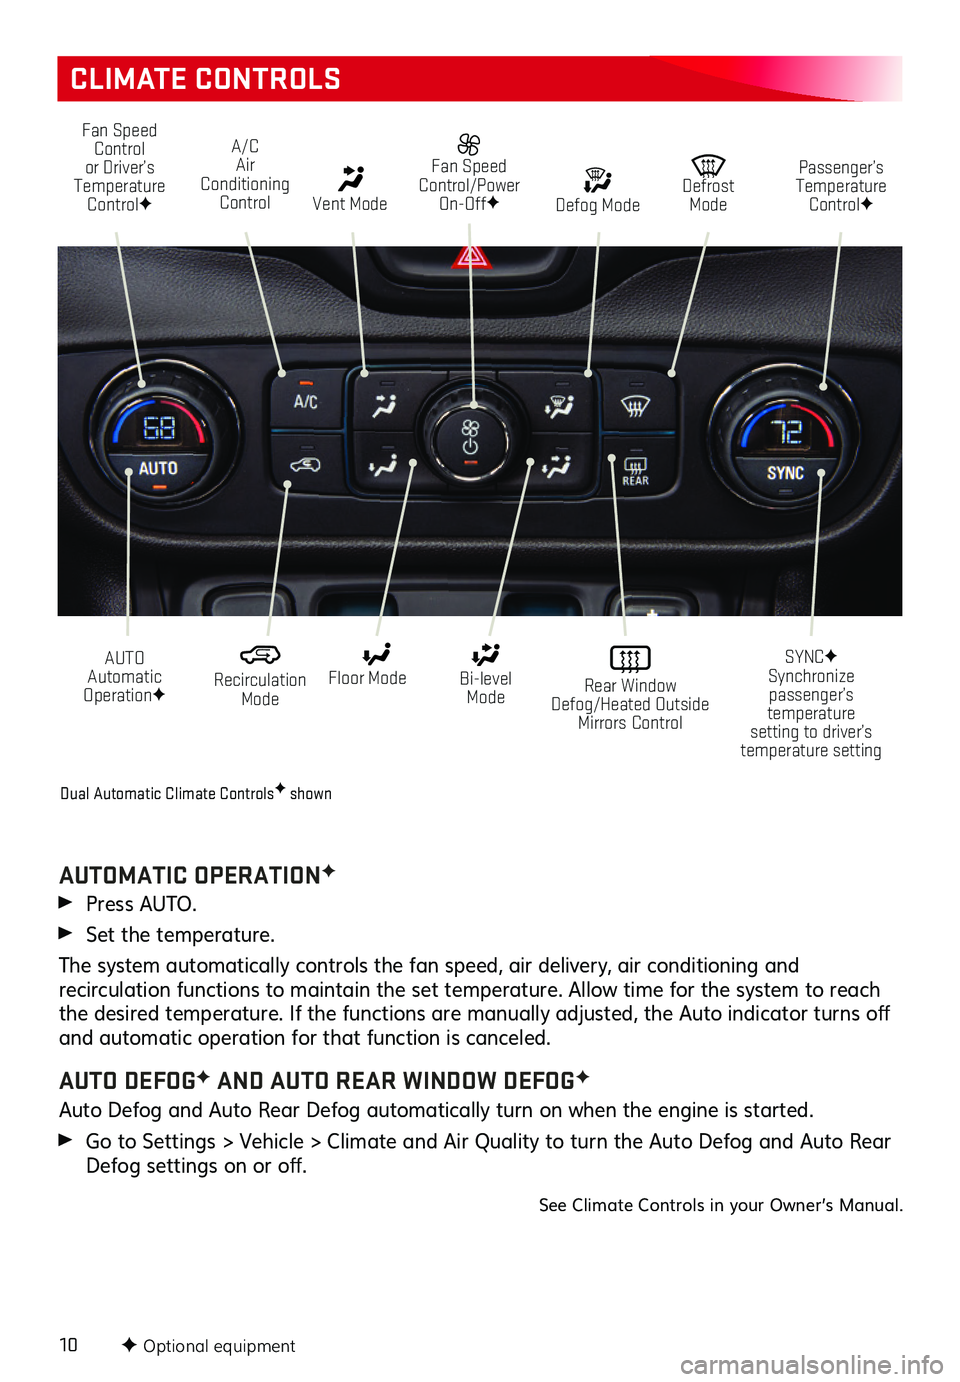 GMC TERRAIN 2021  Get To Know Guide 10
CLIMATE CONTROLS
F Optional equipment
Fan Speed Control or Driver’s Temperature ControlF
A/C Air Conditioning Control   Vent Mode
 Fan Speed Control/Power On-OffF
AUTO  Automatic OperationF
  Rec